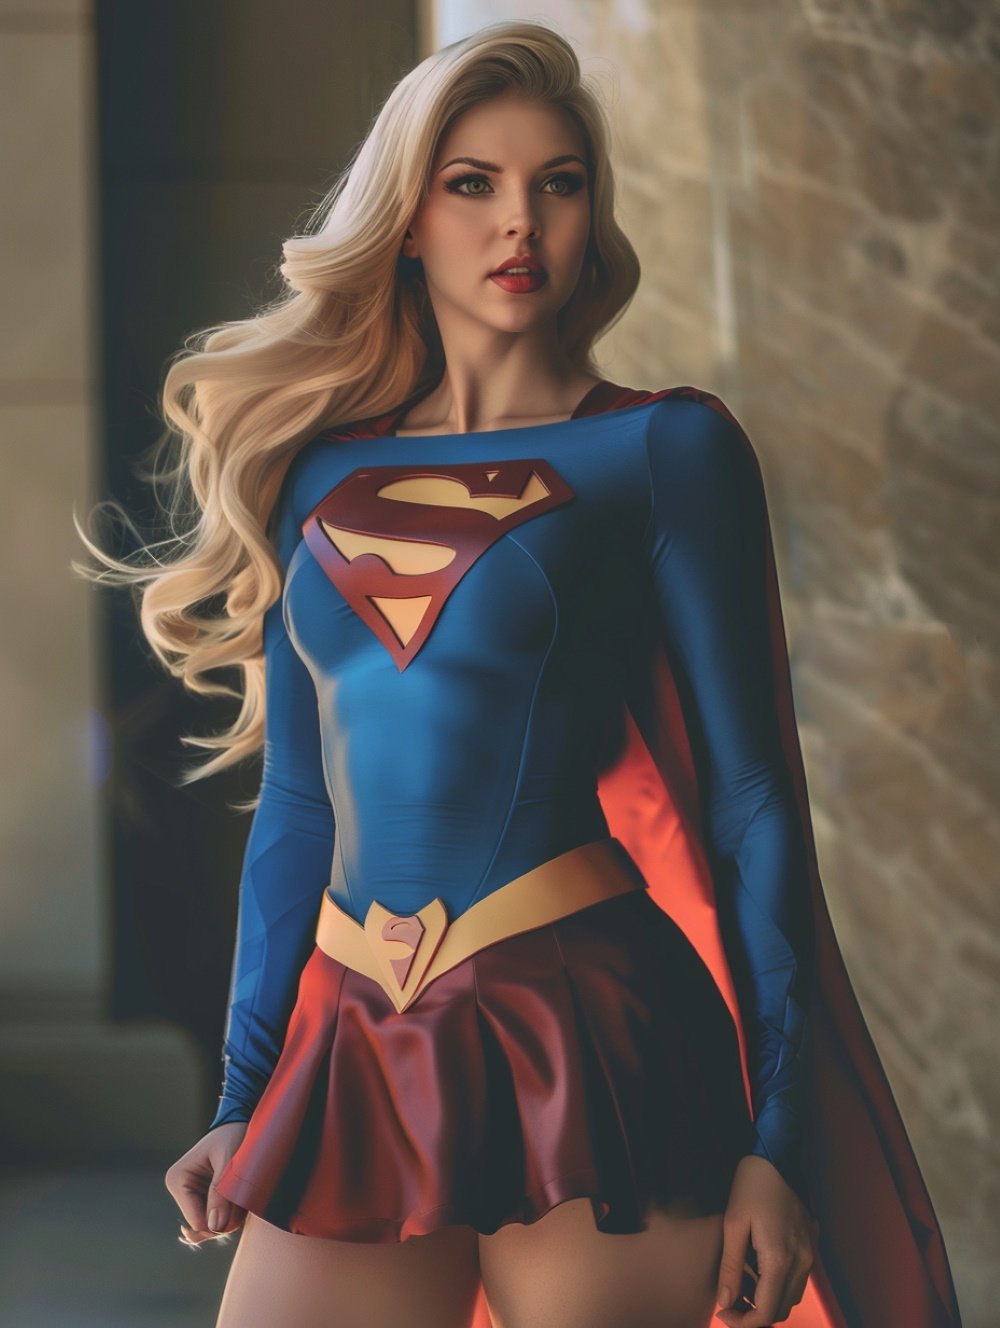 Supergirl is in a impressive stance